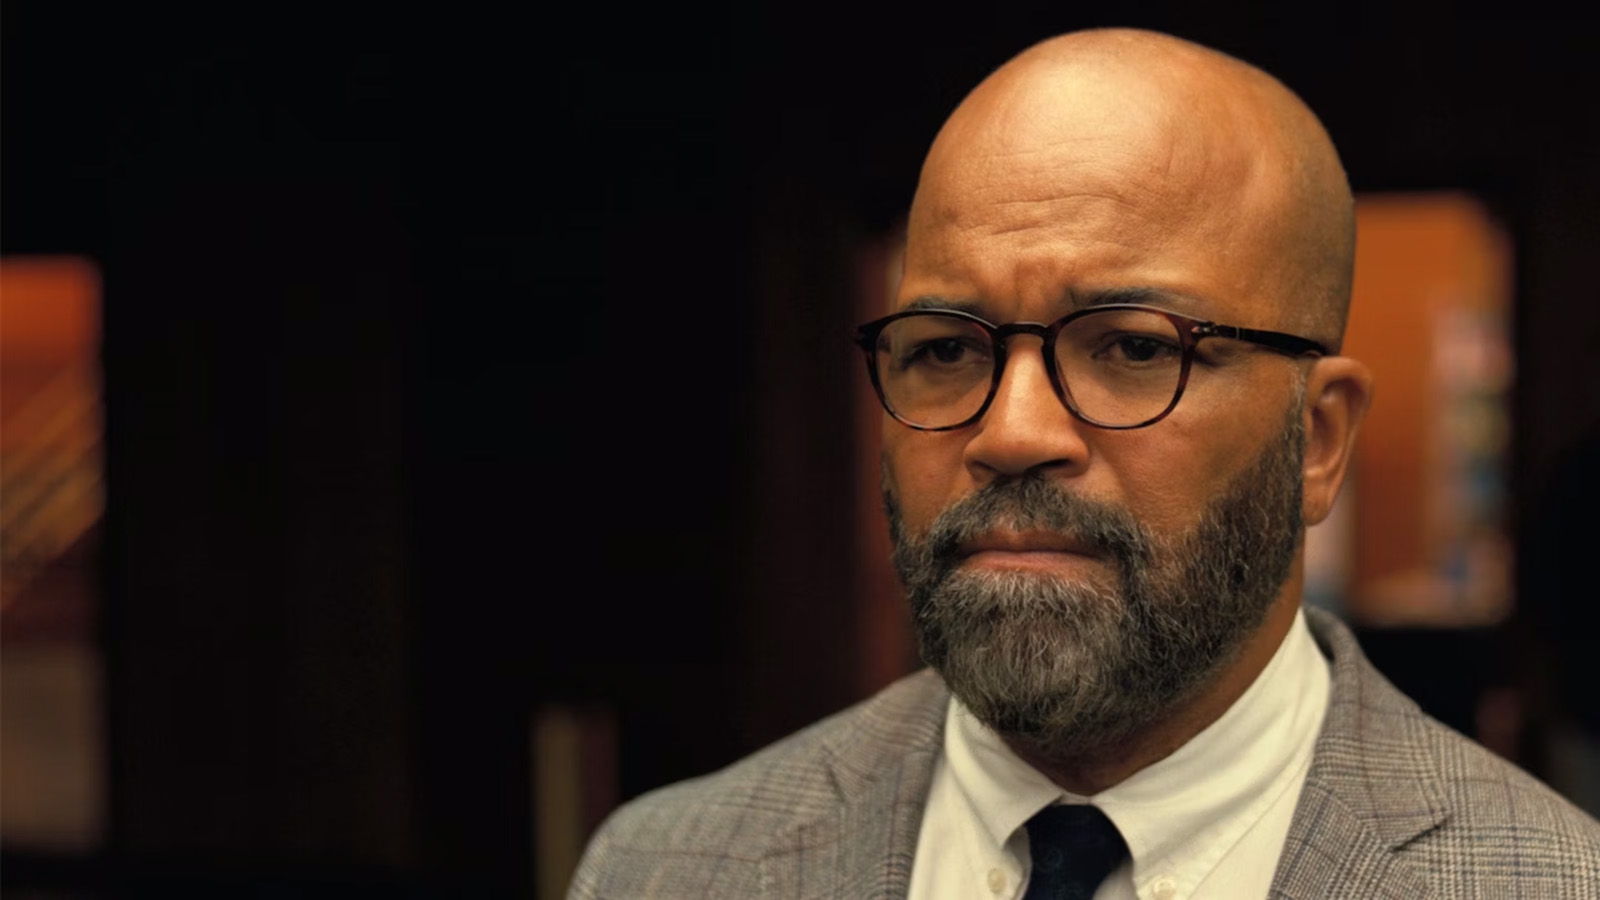 Jeffrey Wright plays Thelonius ‘Monk’ Ellison, a frustrated novelist who writes a provocative "Black" book that exposes the hypocrisy and madness in the publishing industry. Image © Orion Releasing LLC